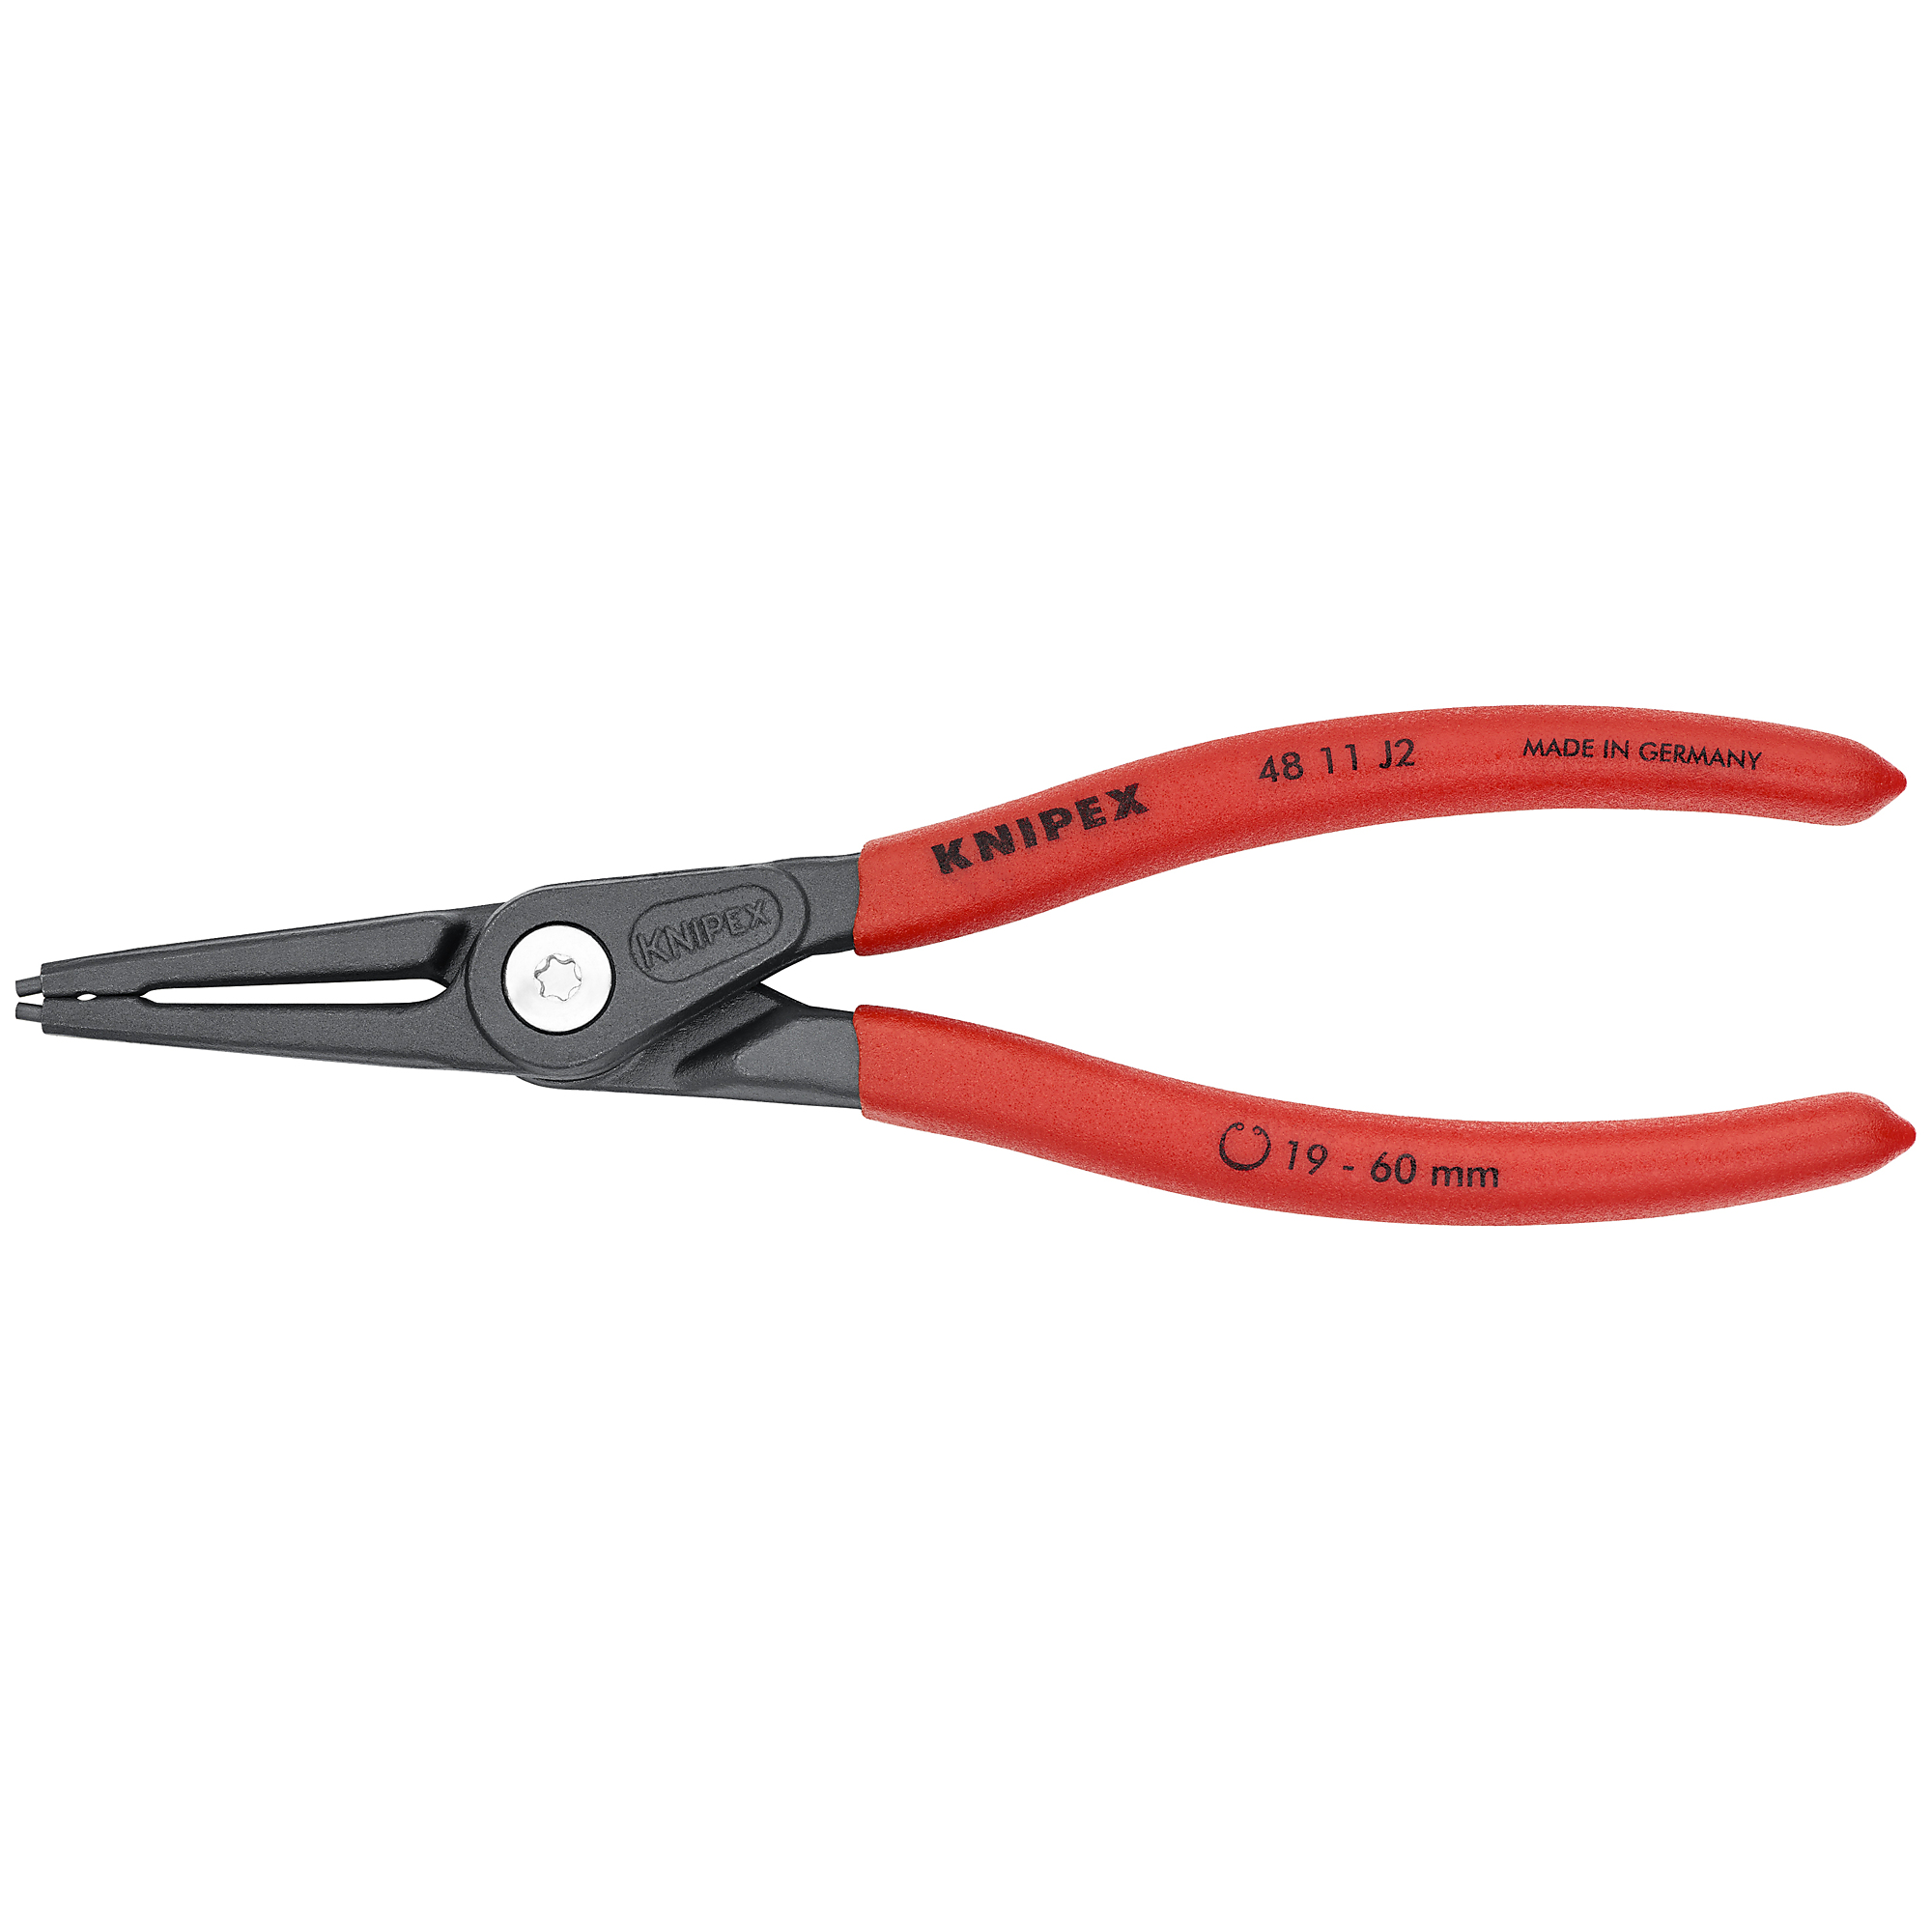 KNIPEX, Int Precision Snap Ring Pliers, 5/64 tip, 7.25Inch, Pieces (qty.) 1 Material Steel, Model 48 11 J2